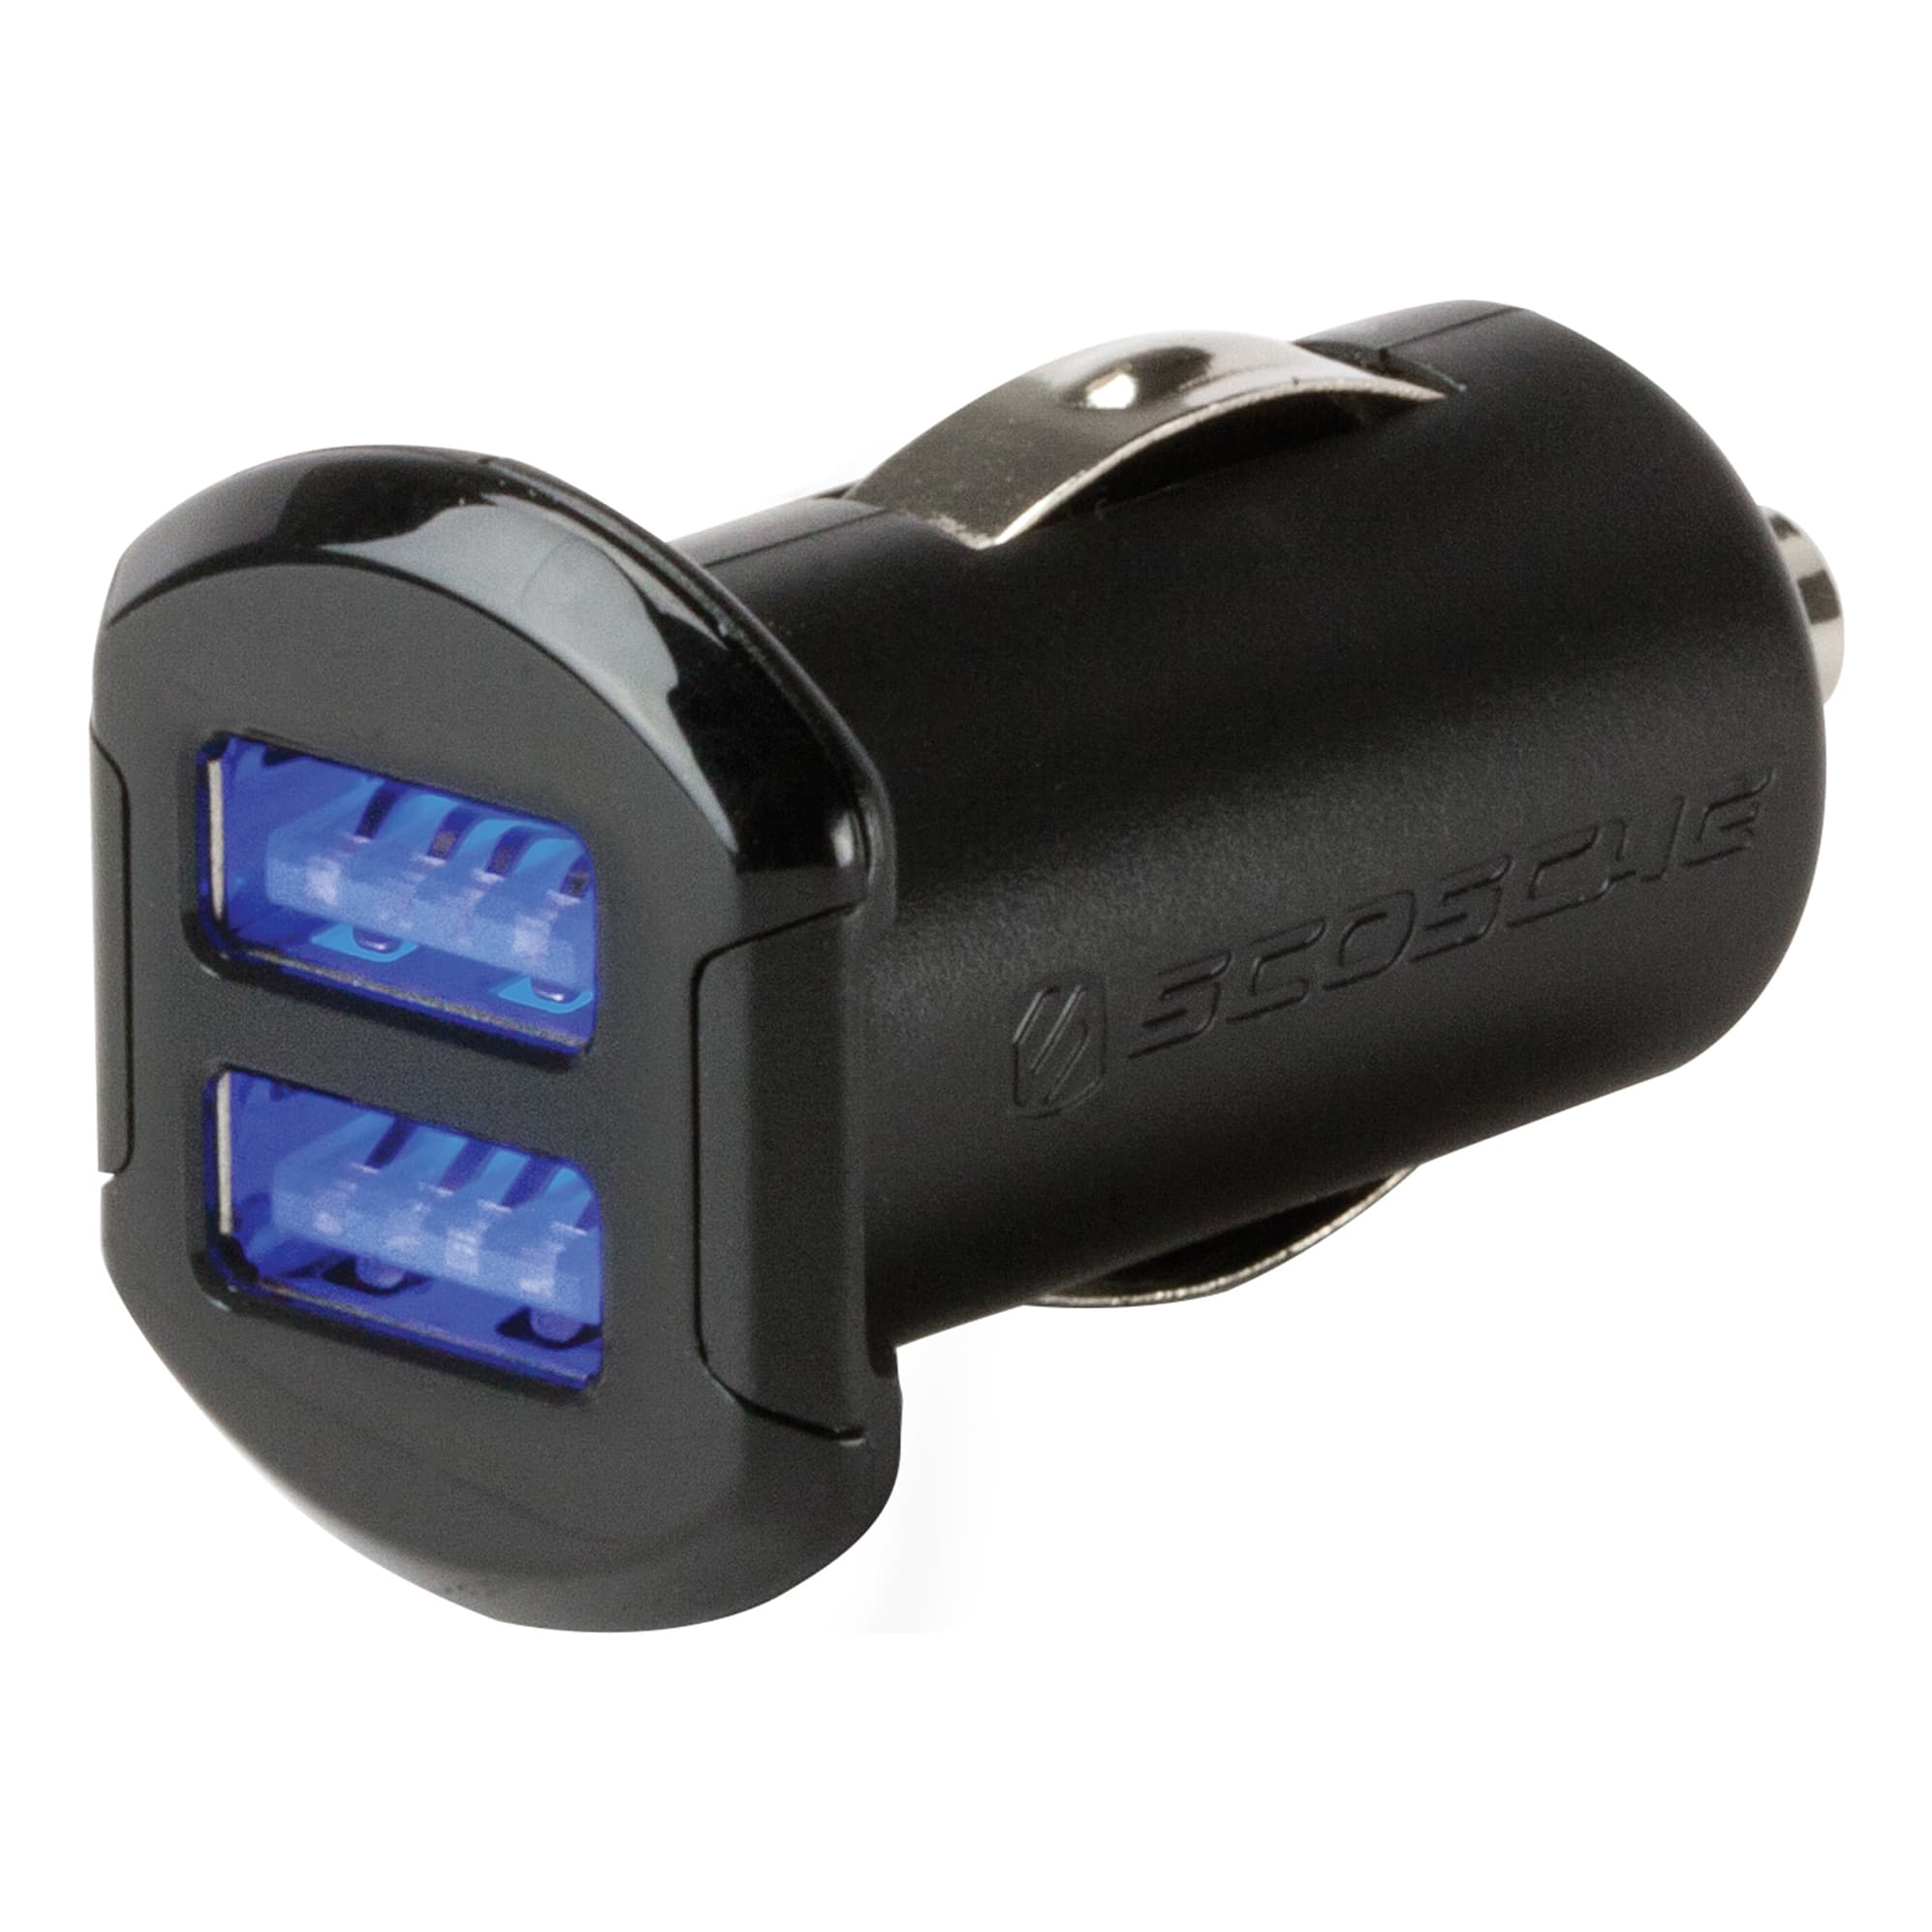 Scosche USBC242M ReVolt Compact Dual Port USB Fast Car Charger Adapter with Illuminated LED Backlight